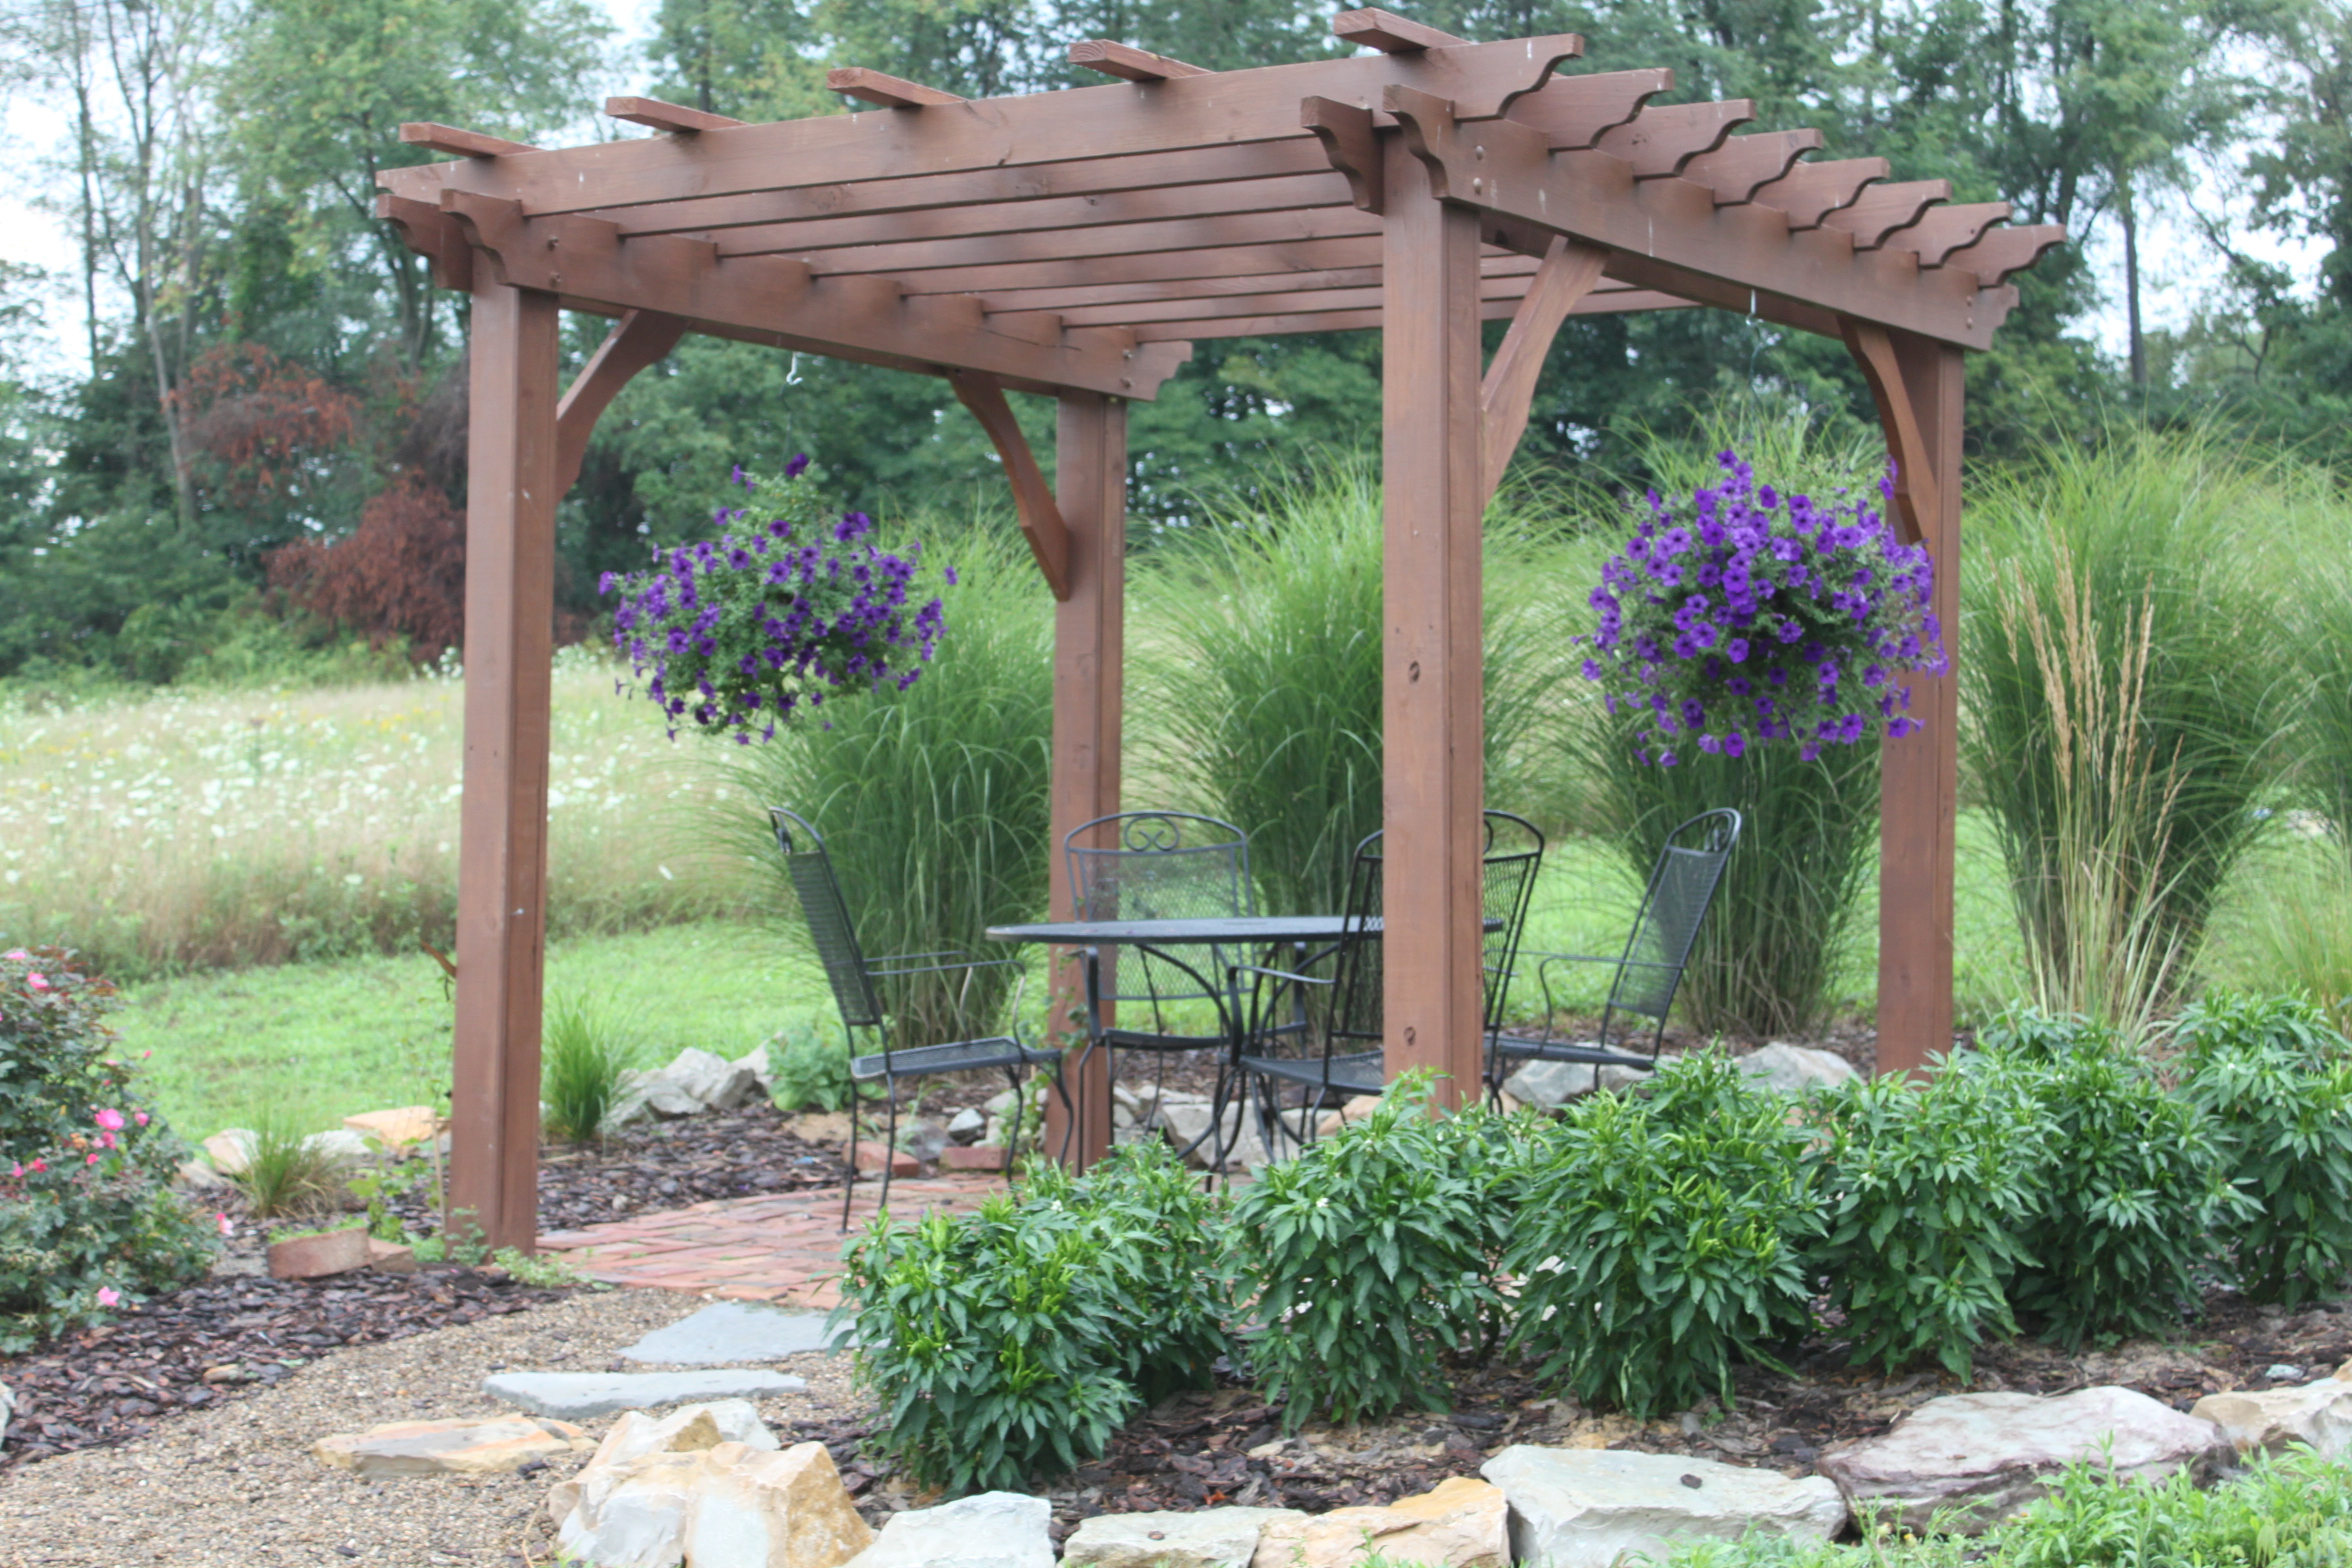 The very first pergola we ever built.